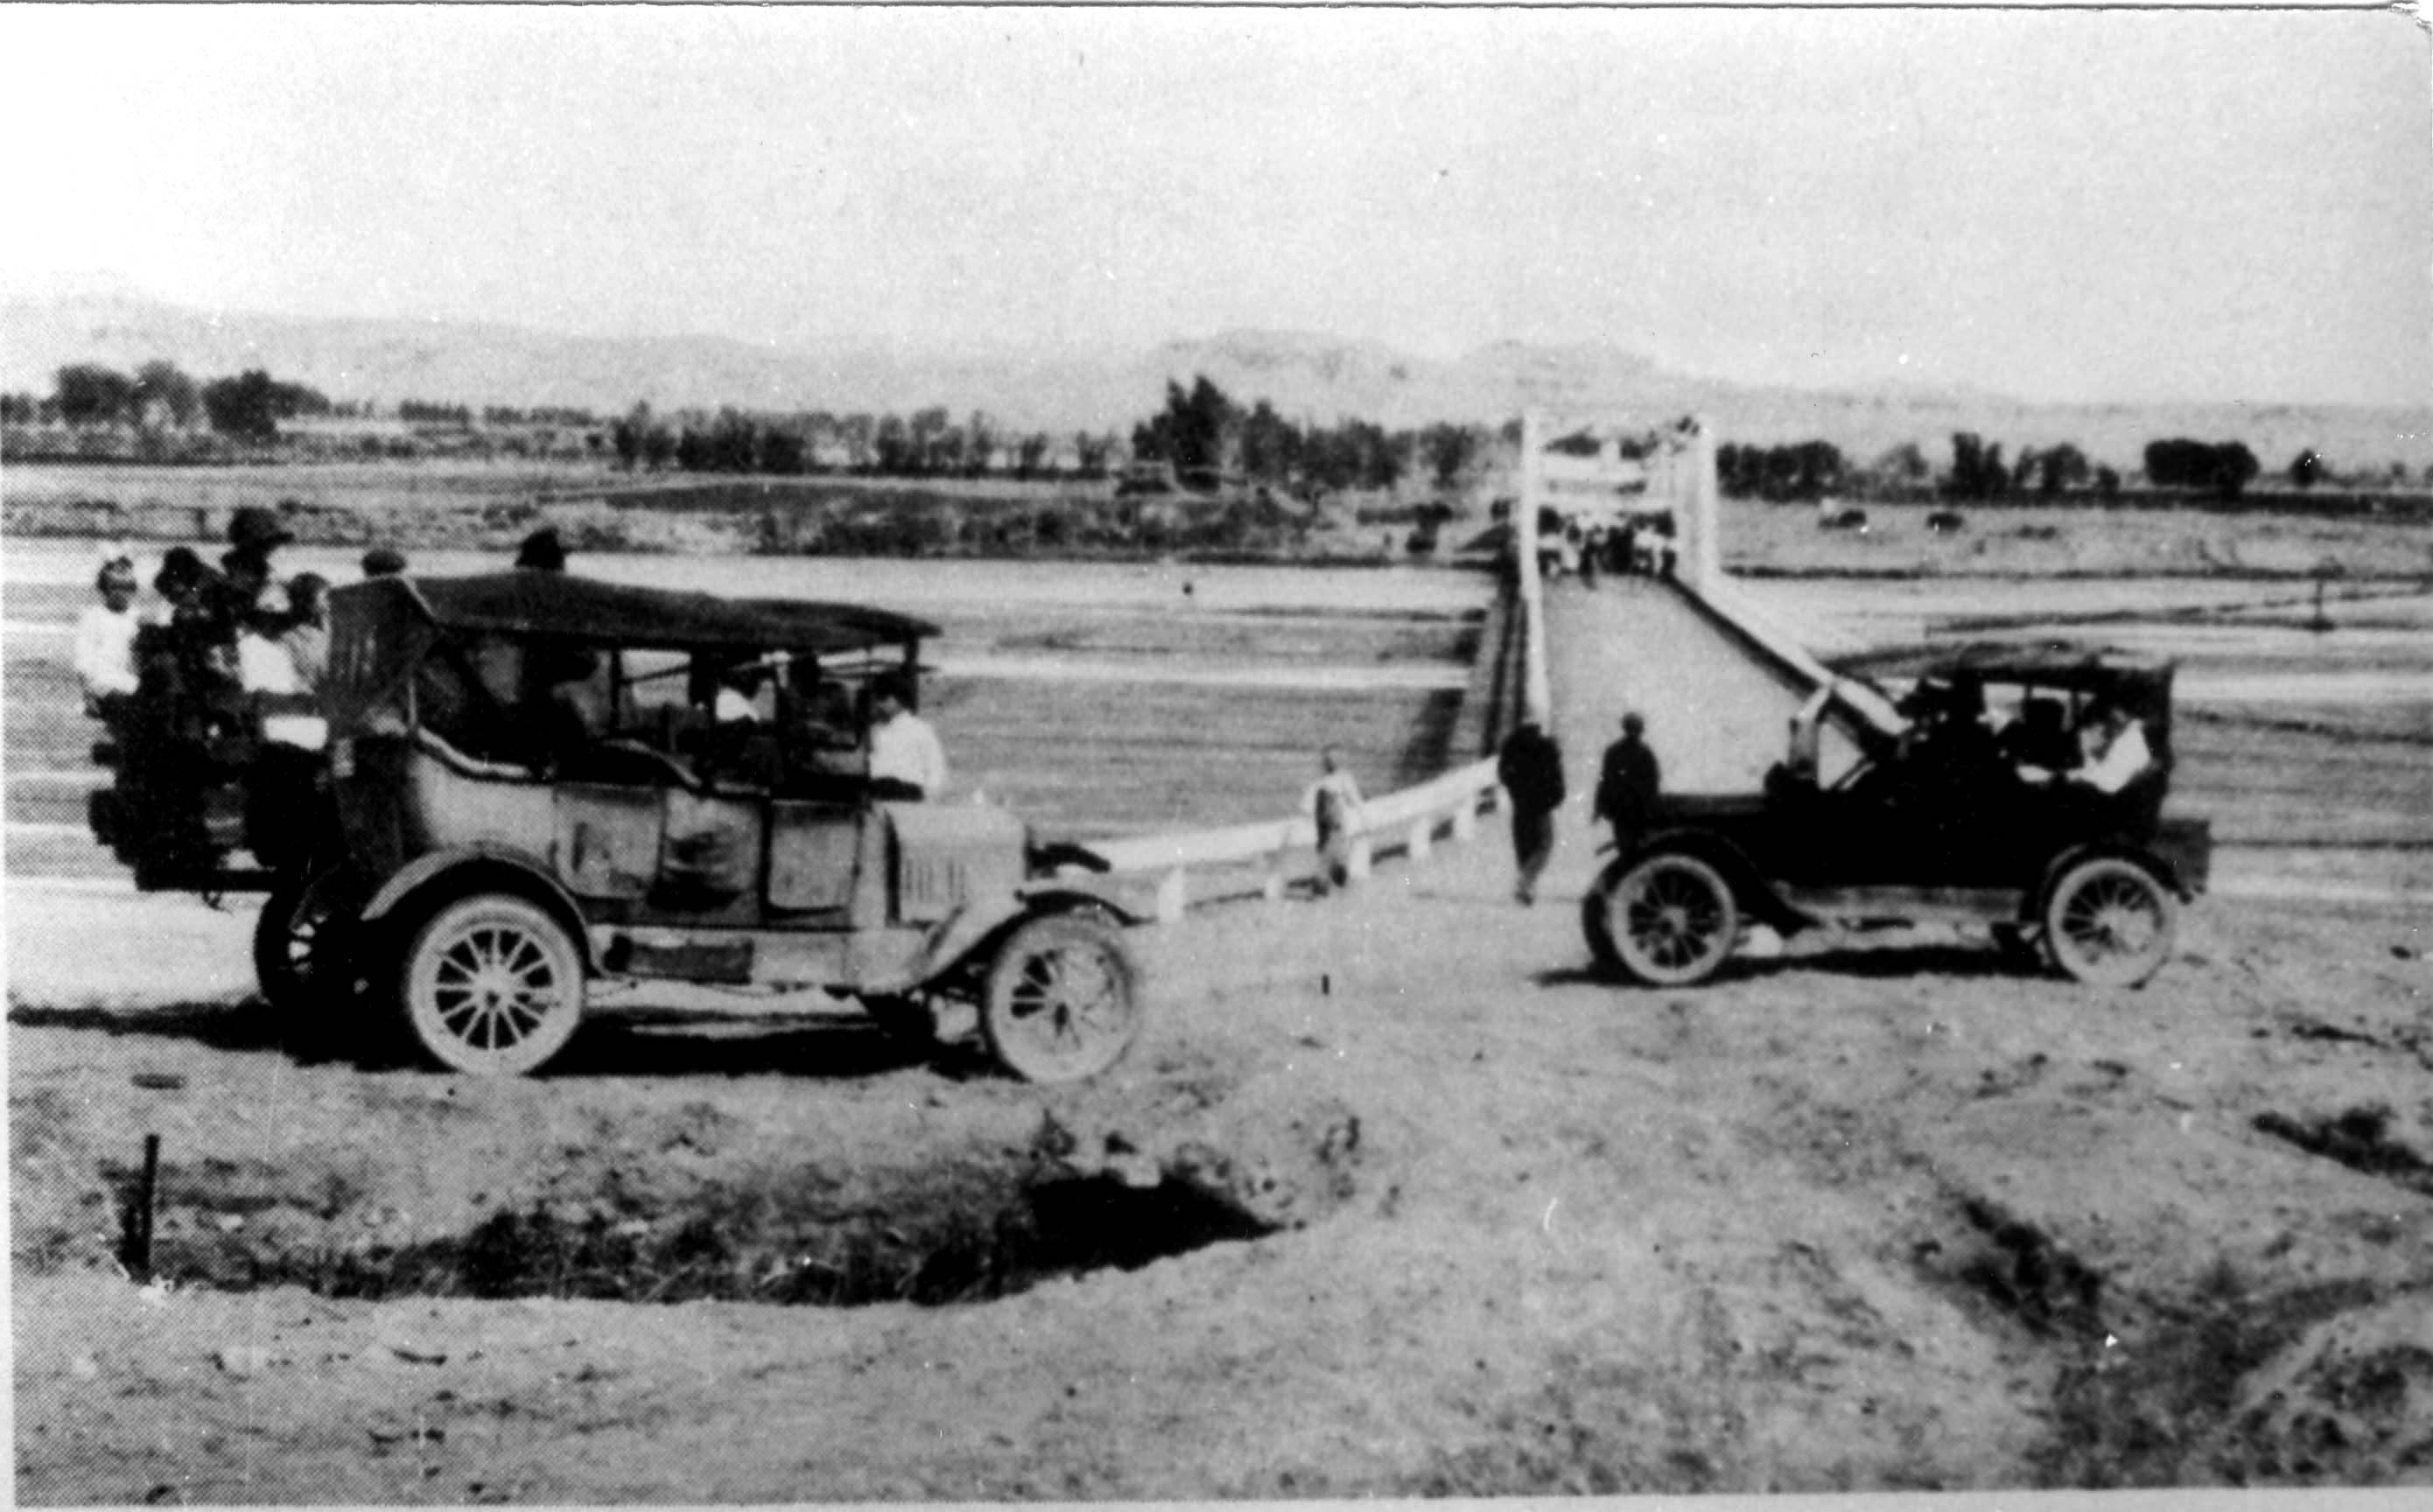 Two cars ready to cross the new Virgin River Bridge in 1921